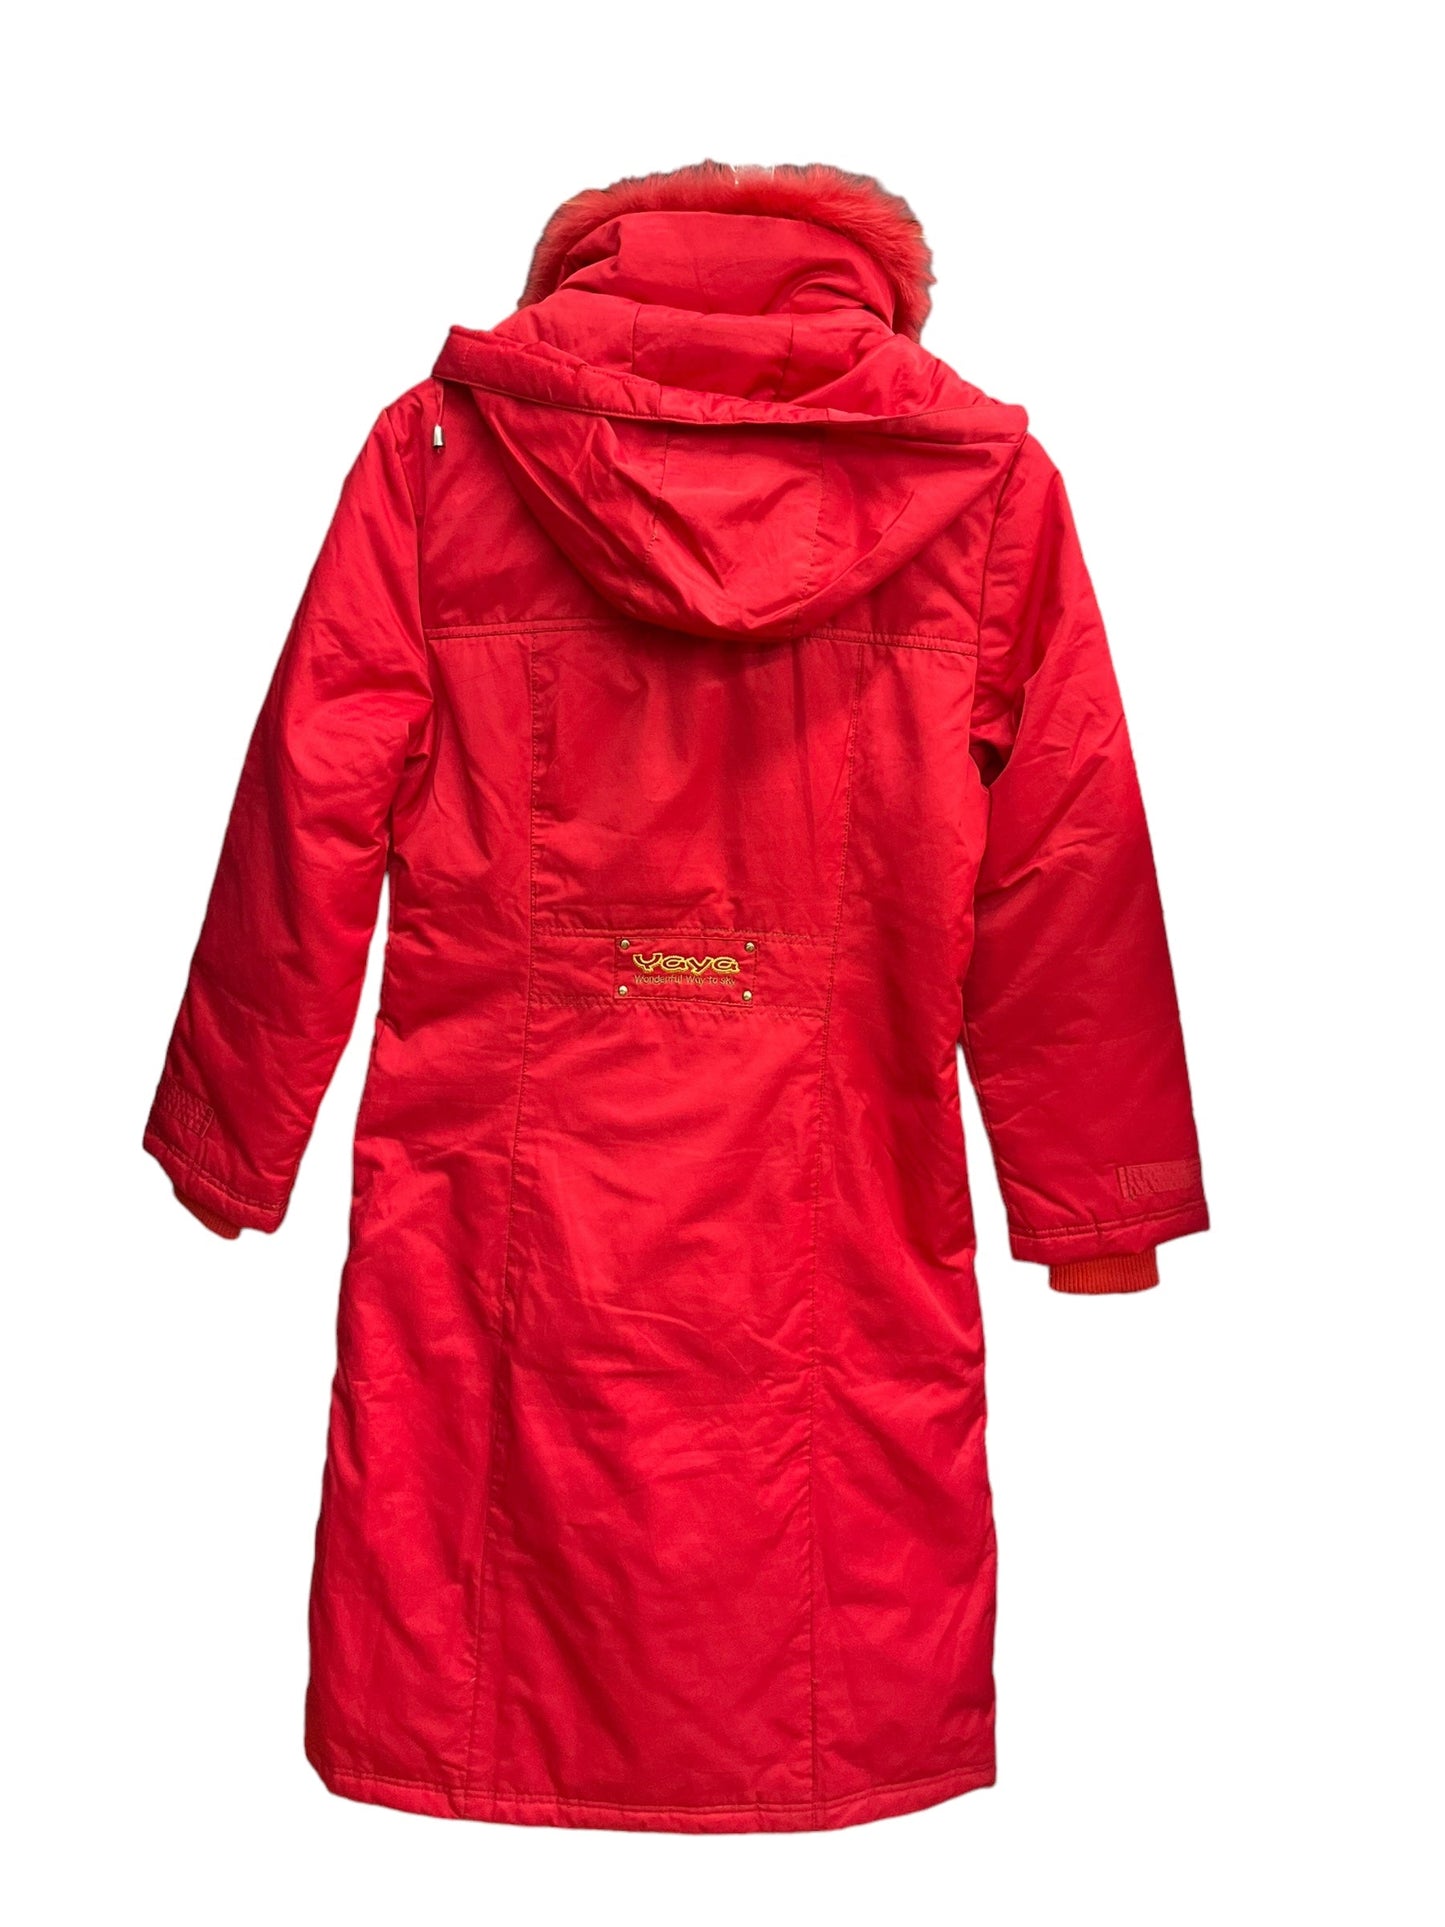 Red Coat Other Clothes Mentor, Size M